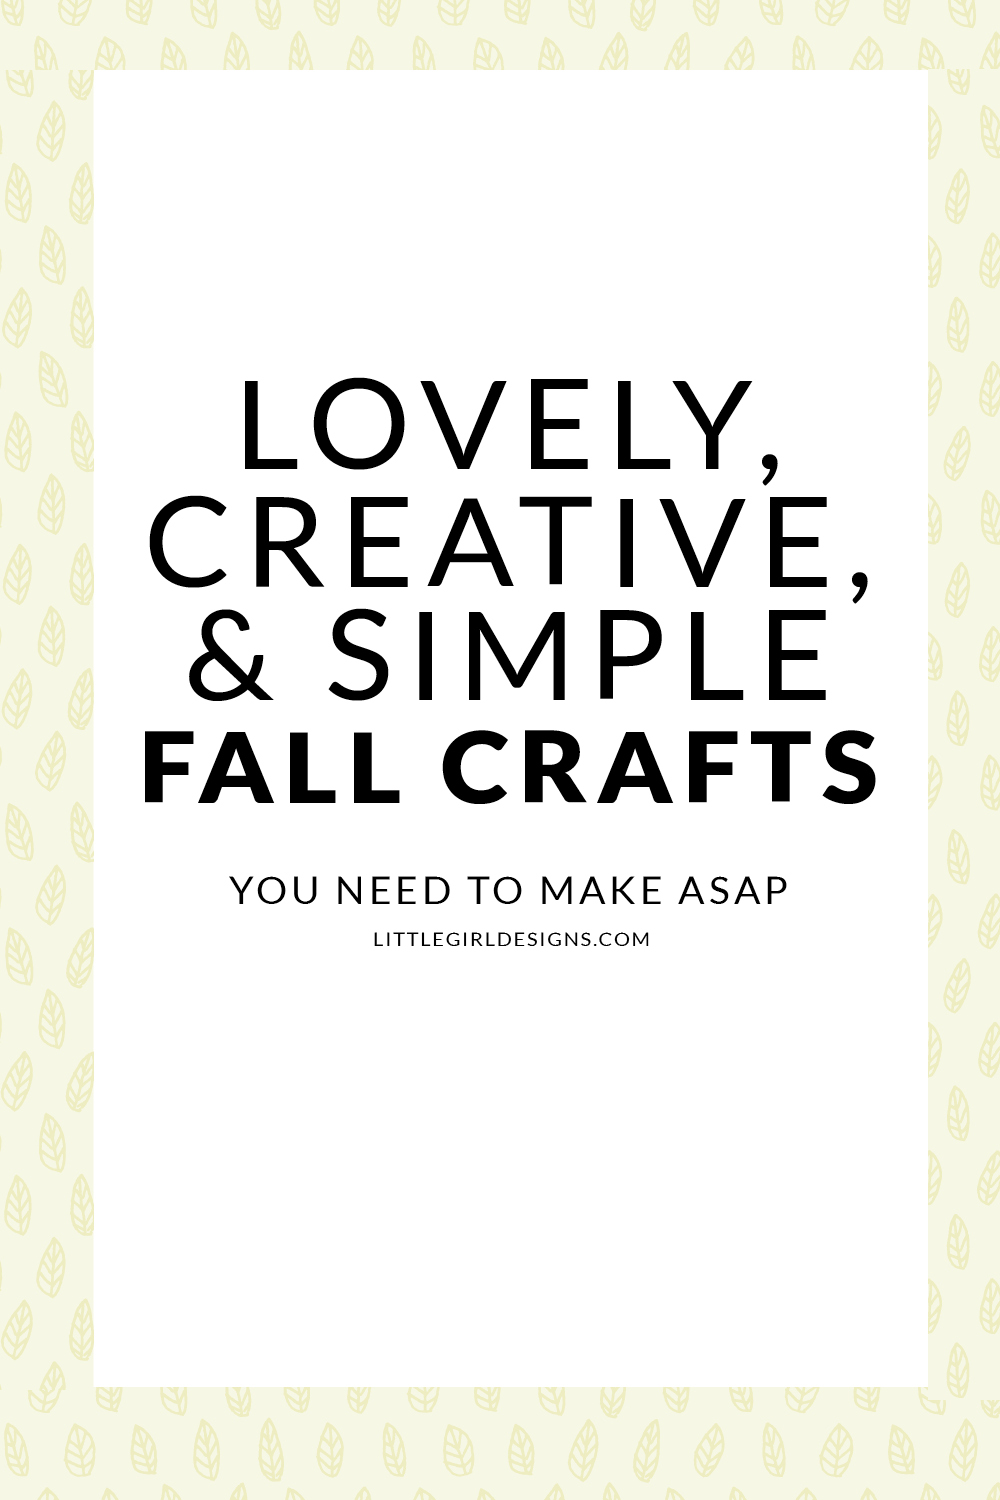 Lovely, Creative, & Simple Fall Crafts that you've got to try this year! Learn how to preserve leaves, paint a gorgeous watercolor leaf, and make a book page pumpkin! Too much fun @ littlegirldesigns.com